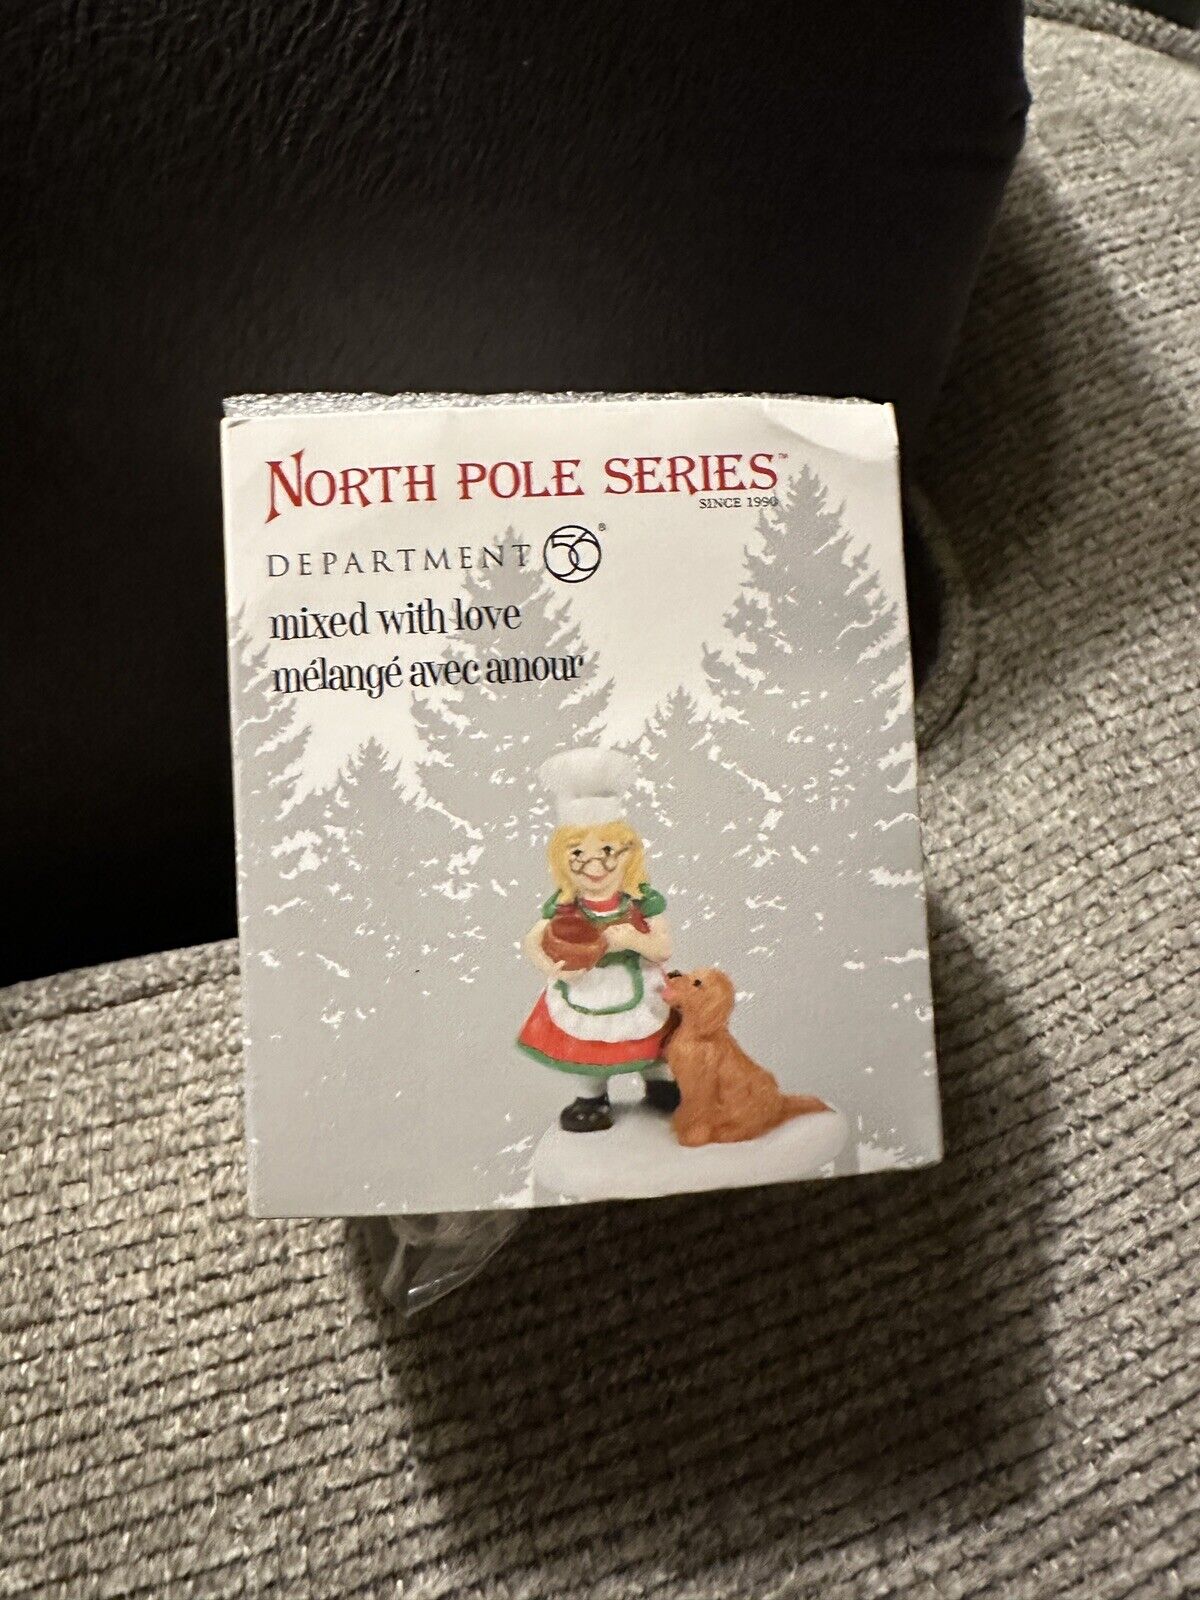 Department 56 North Pole Series Mixed With Love